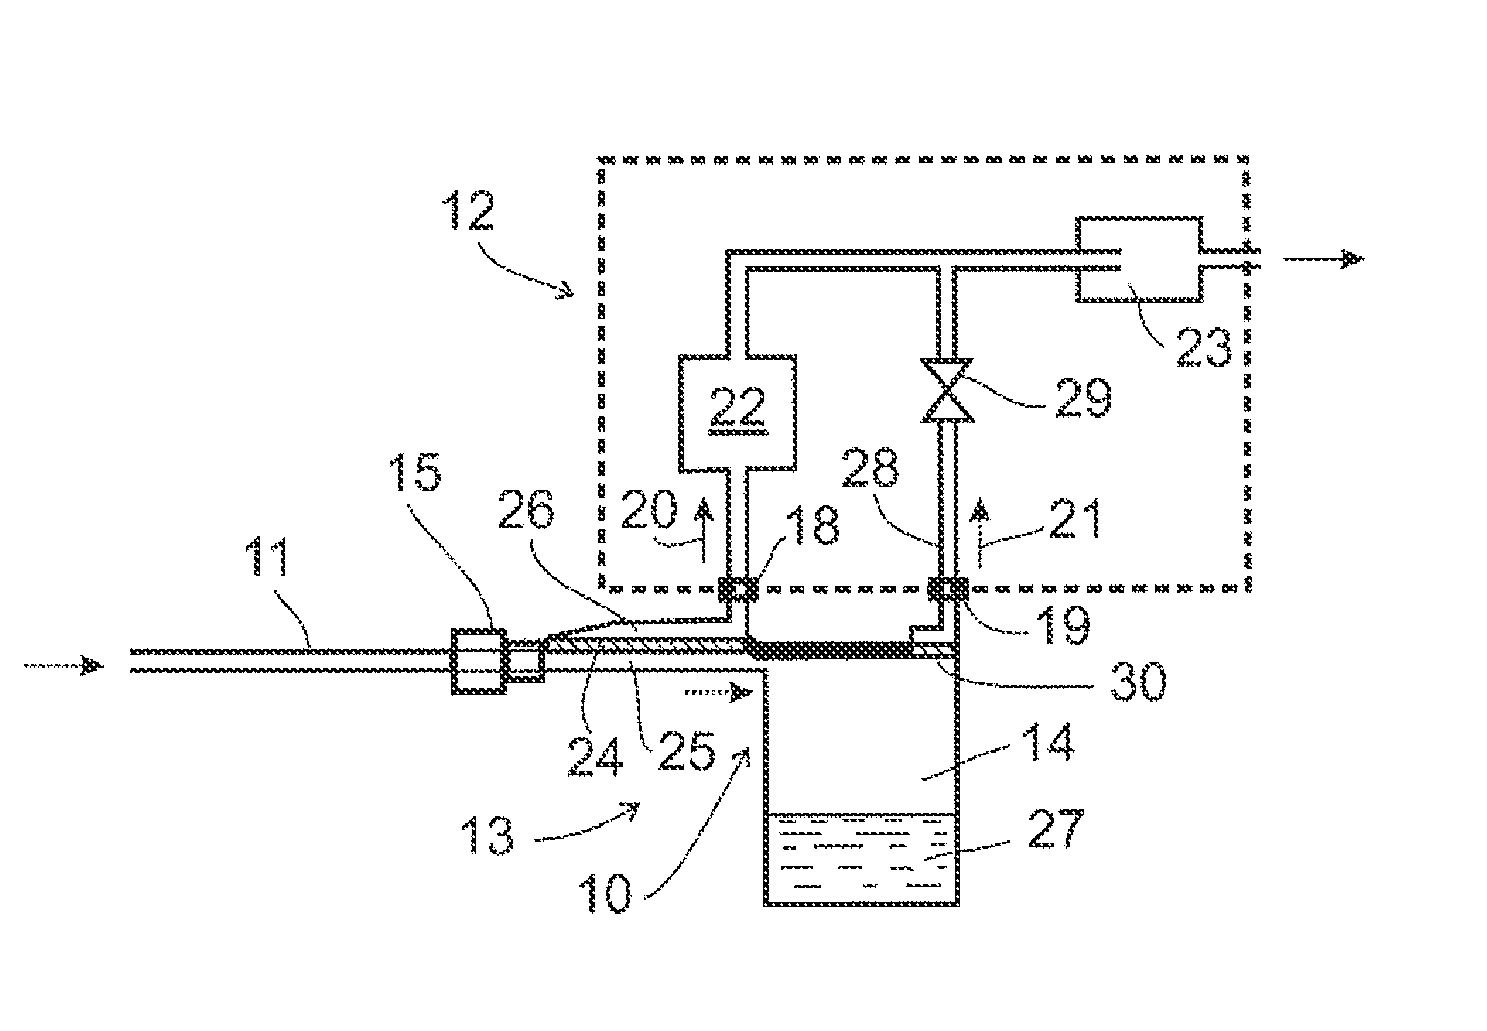 Liquid separation apparatus for removing a liquid from a respiratory gas and respiratory gas analyzing system